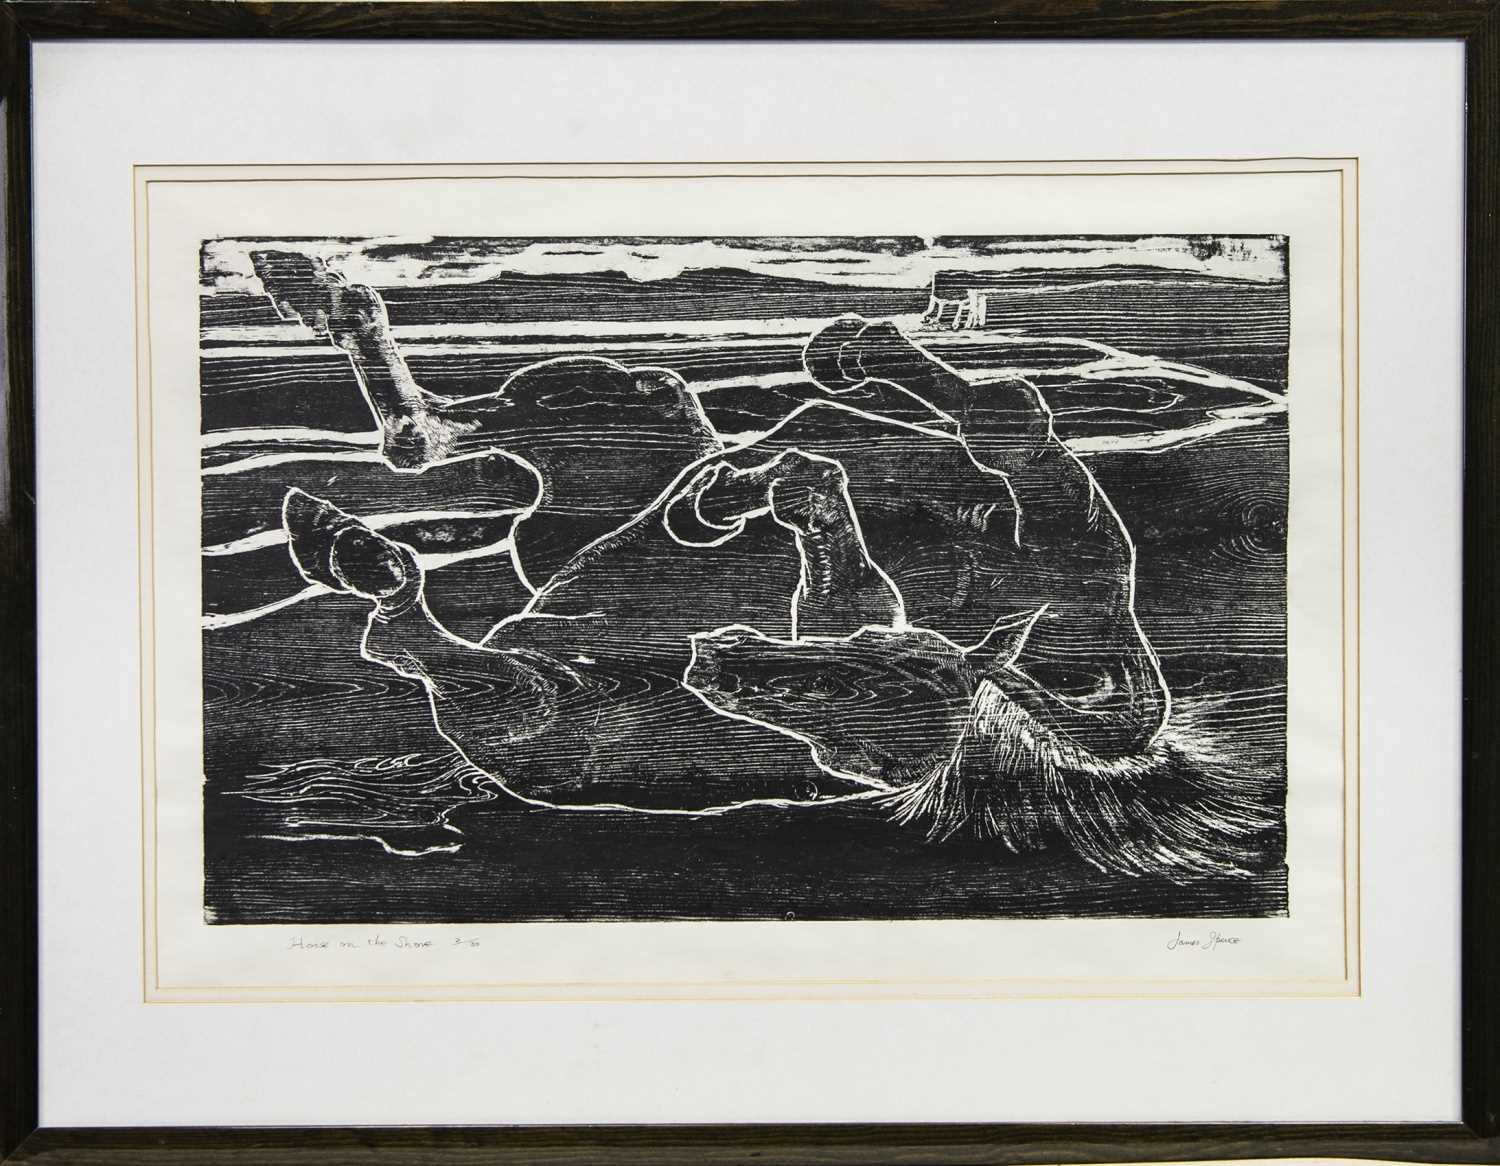 Lot 11 - HORSE ON THE SHORE, A WOODCUT BY JAMES SPENCE